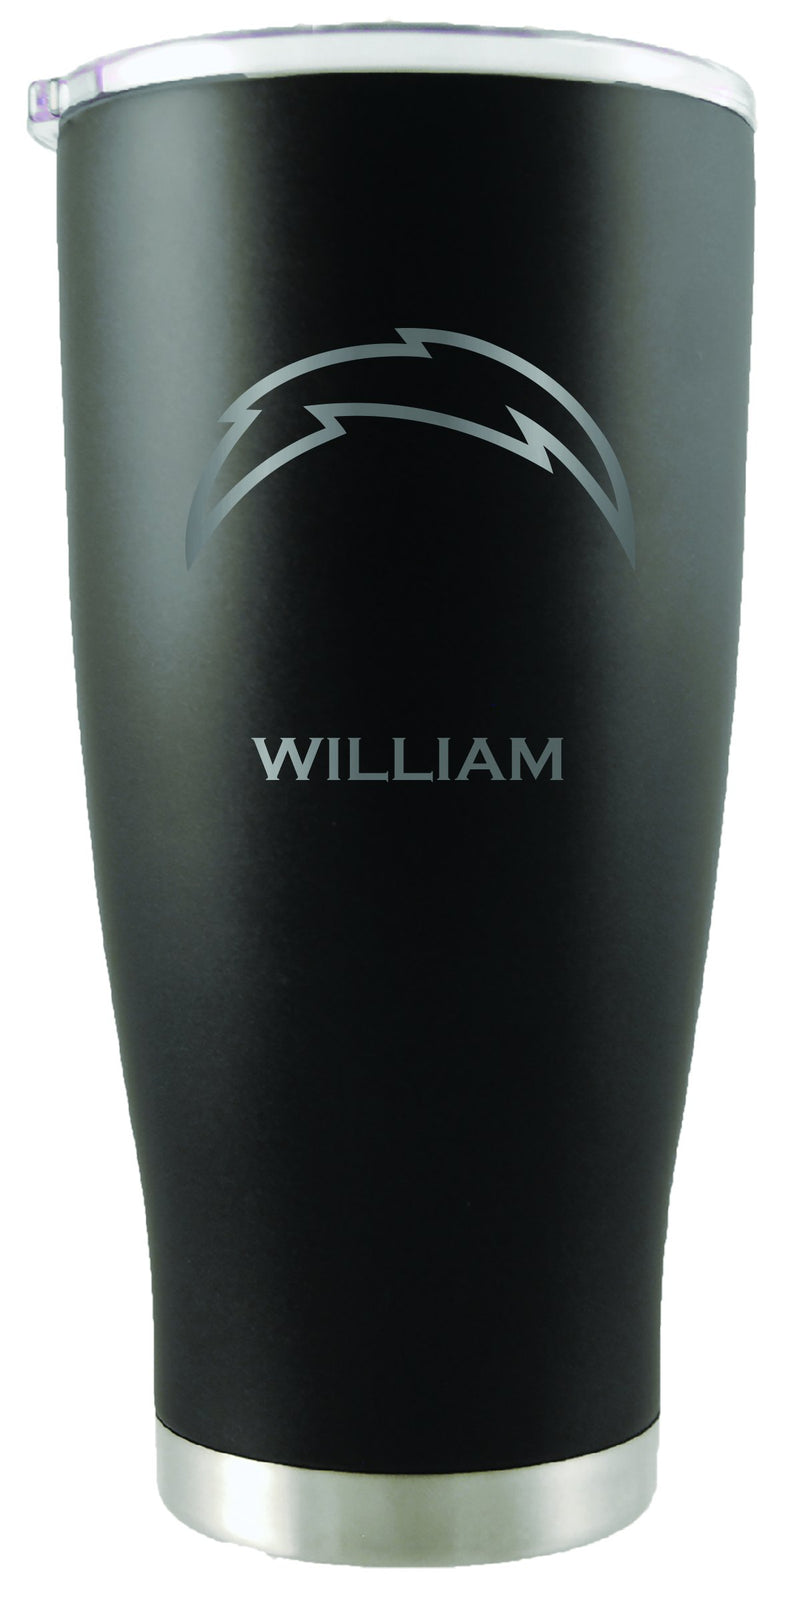 20oz Black Personalized Stainless Steel Tumbler | Los Angeles Chargers
CurrentProduct, Drinkware_category_All, LAC, Los Angeles Chargers, NFL, Personalized_Personalized, Stainless Steel
The Memory Company